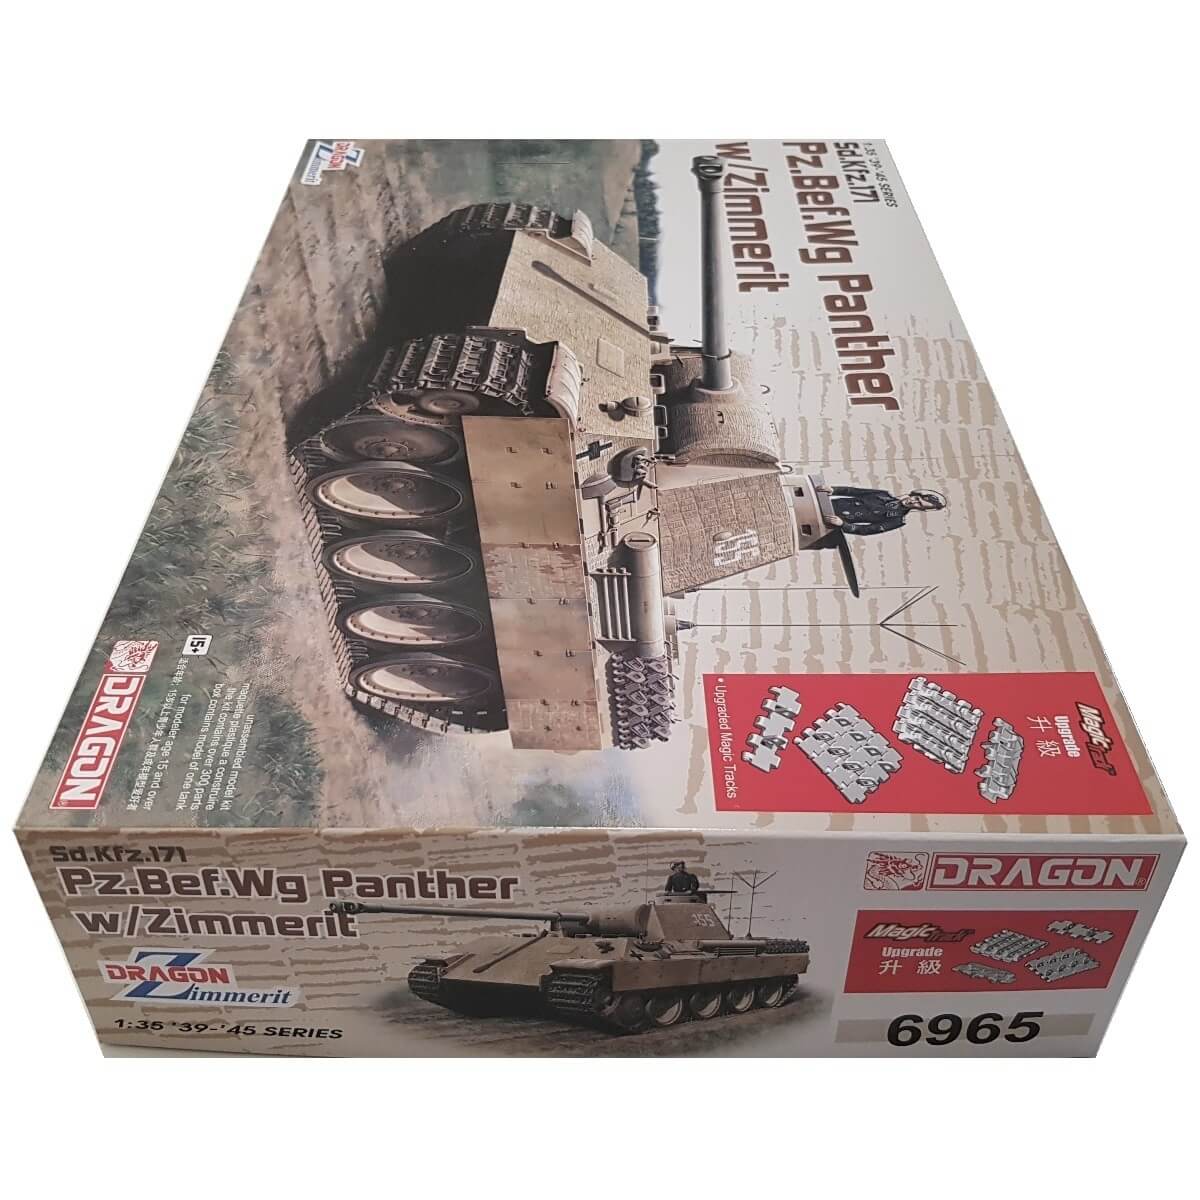 1:35 Sd.Kfz. 171 Pz.Bef.Wg Panther with Zimmerit - DRAGON